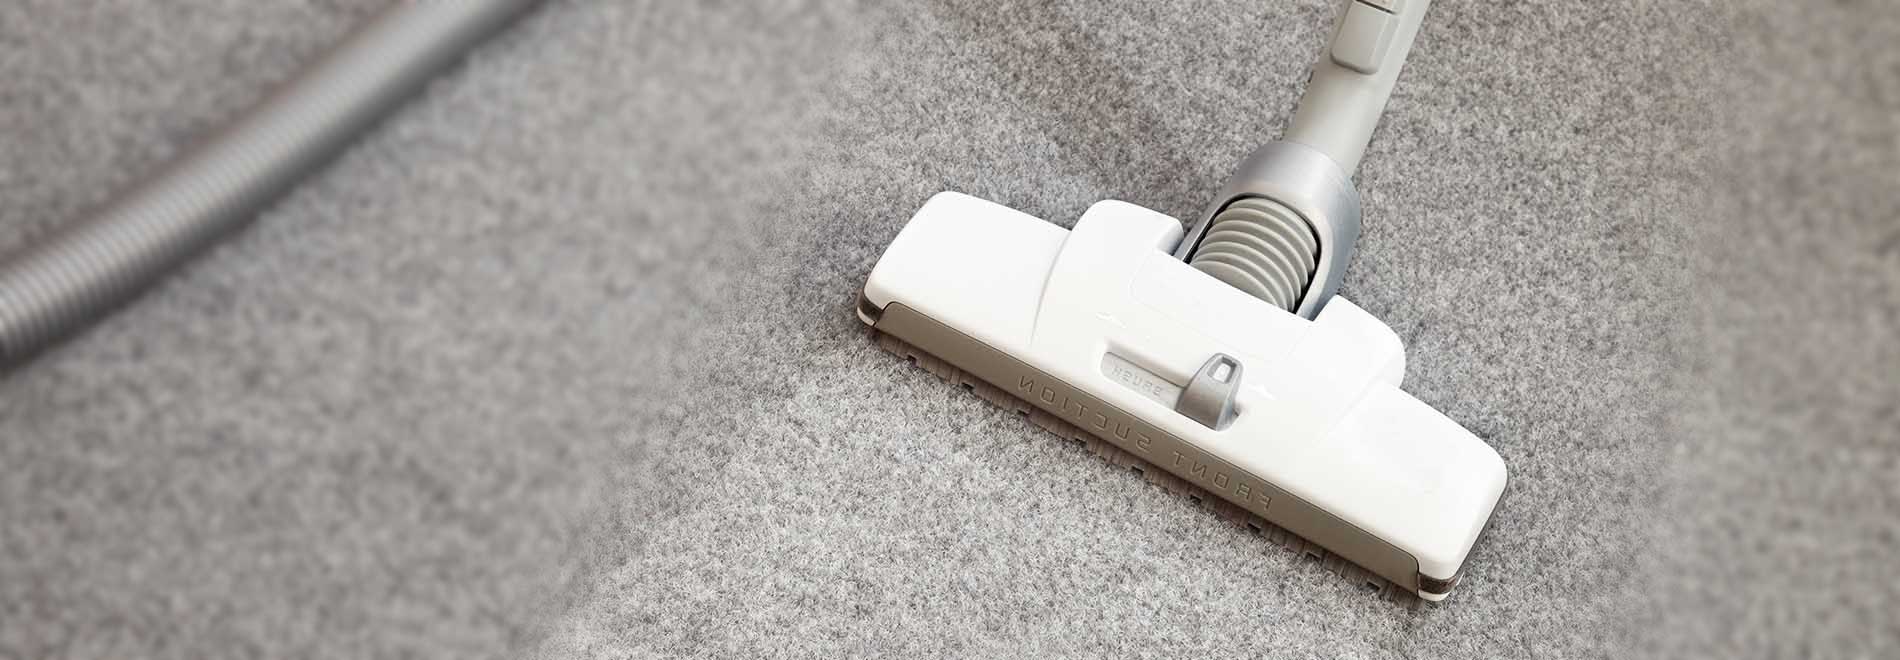 Carpet Cleaners Mayfair